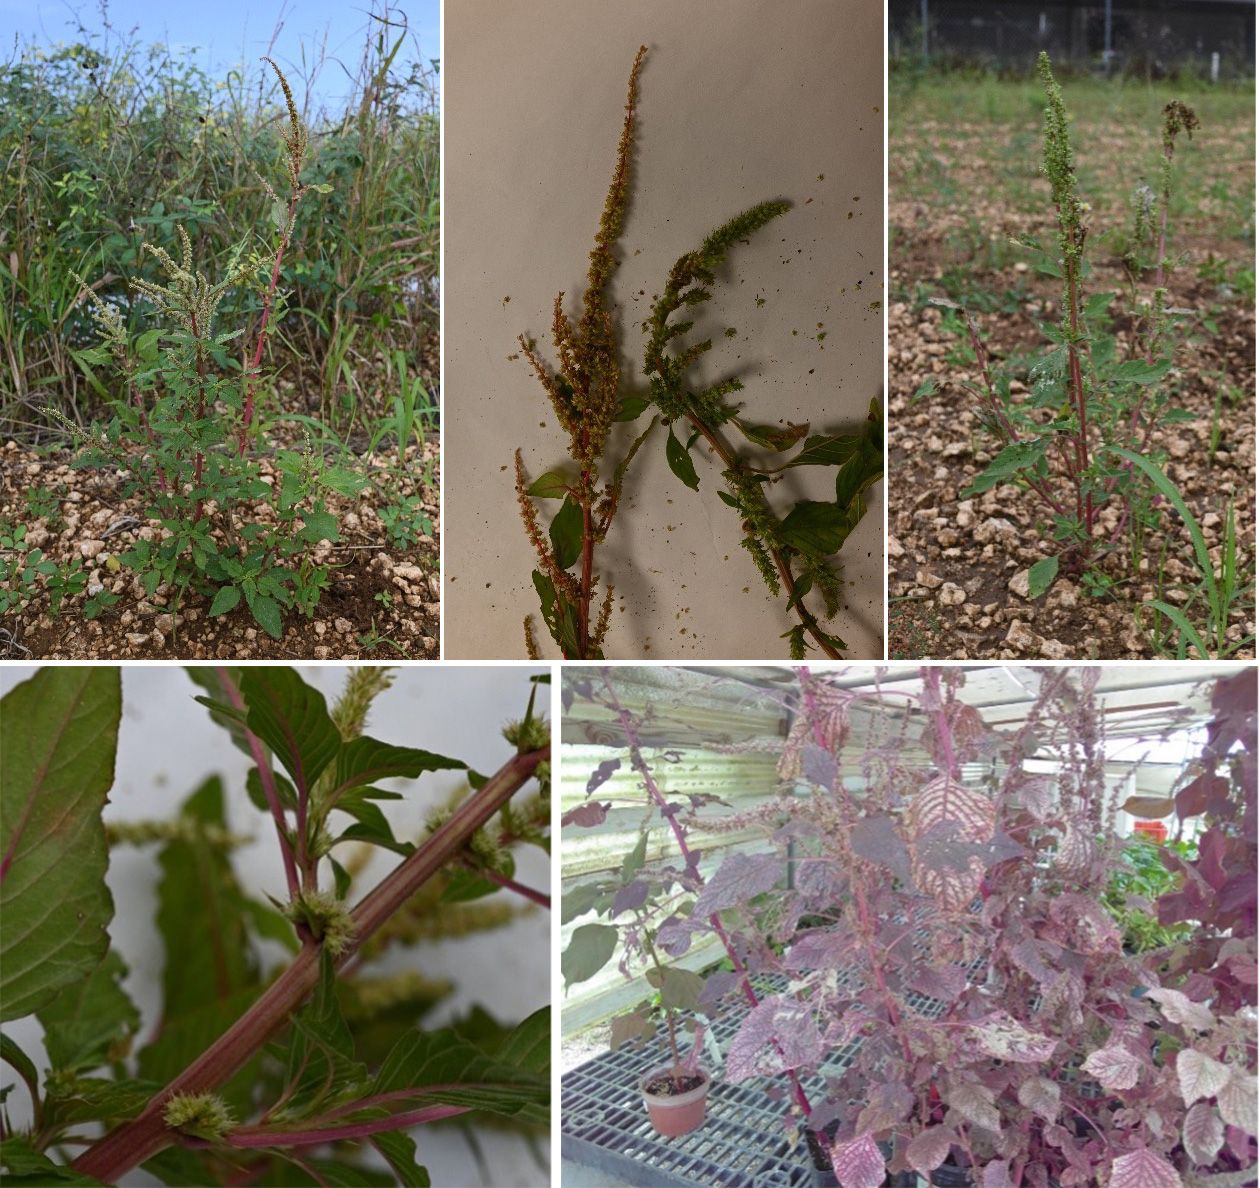 Top left: Spiny amaranth (Amaranthus spinosus). Top center: Flowers of spiny amaranth (left) and smooth pigweed (right). Top right: Smooth pigweed (Amaranthus hybridus). Bottom left: Spines along the stem of spiny amaranth, which are not present on smooth pigweed. Spiny amaranth also has slightly smaller floral bracts and a less “hairy” appearance. Bottom right: Smooth pigweed in the red form (with melonworm infestation).